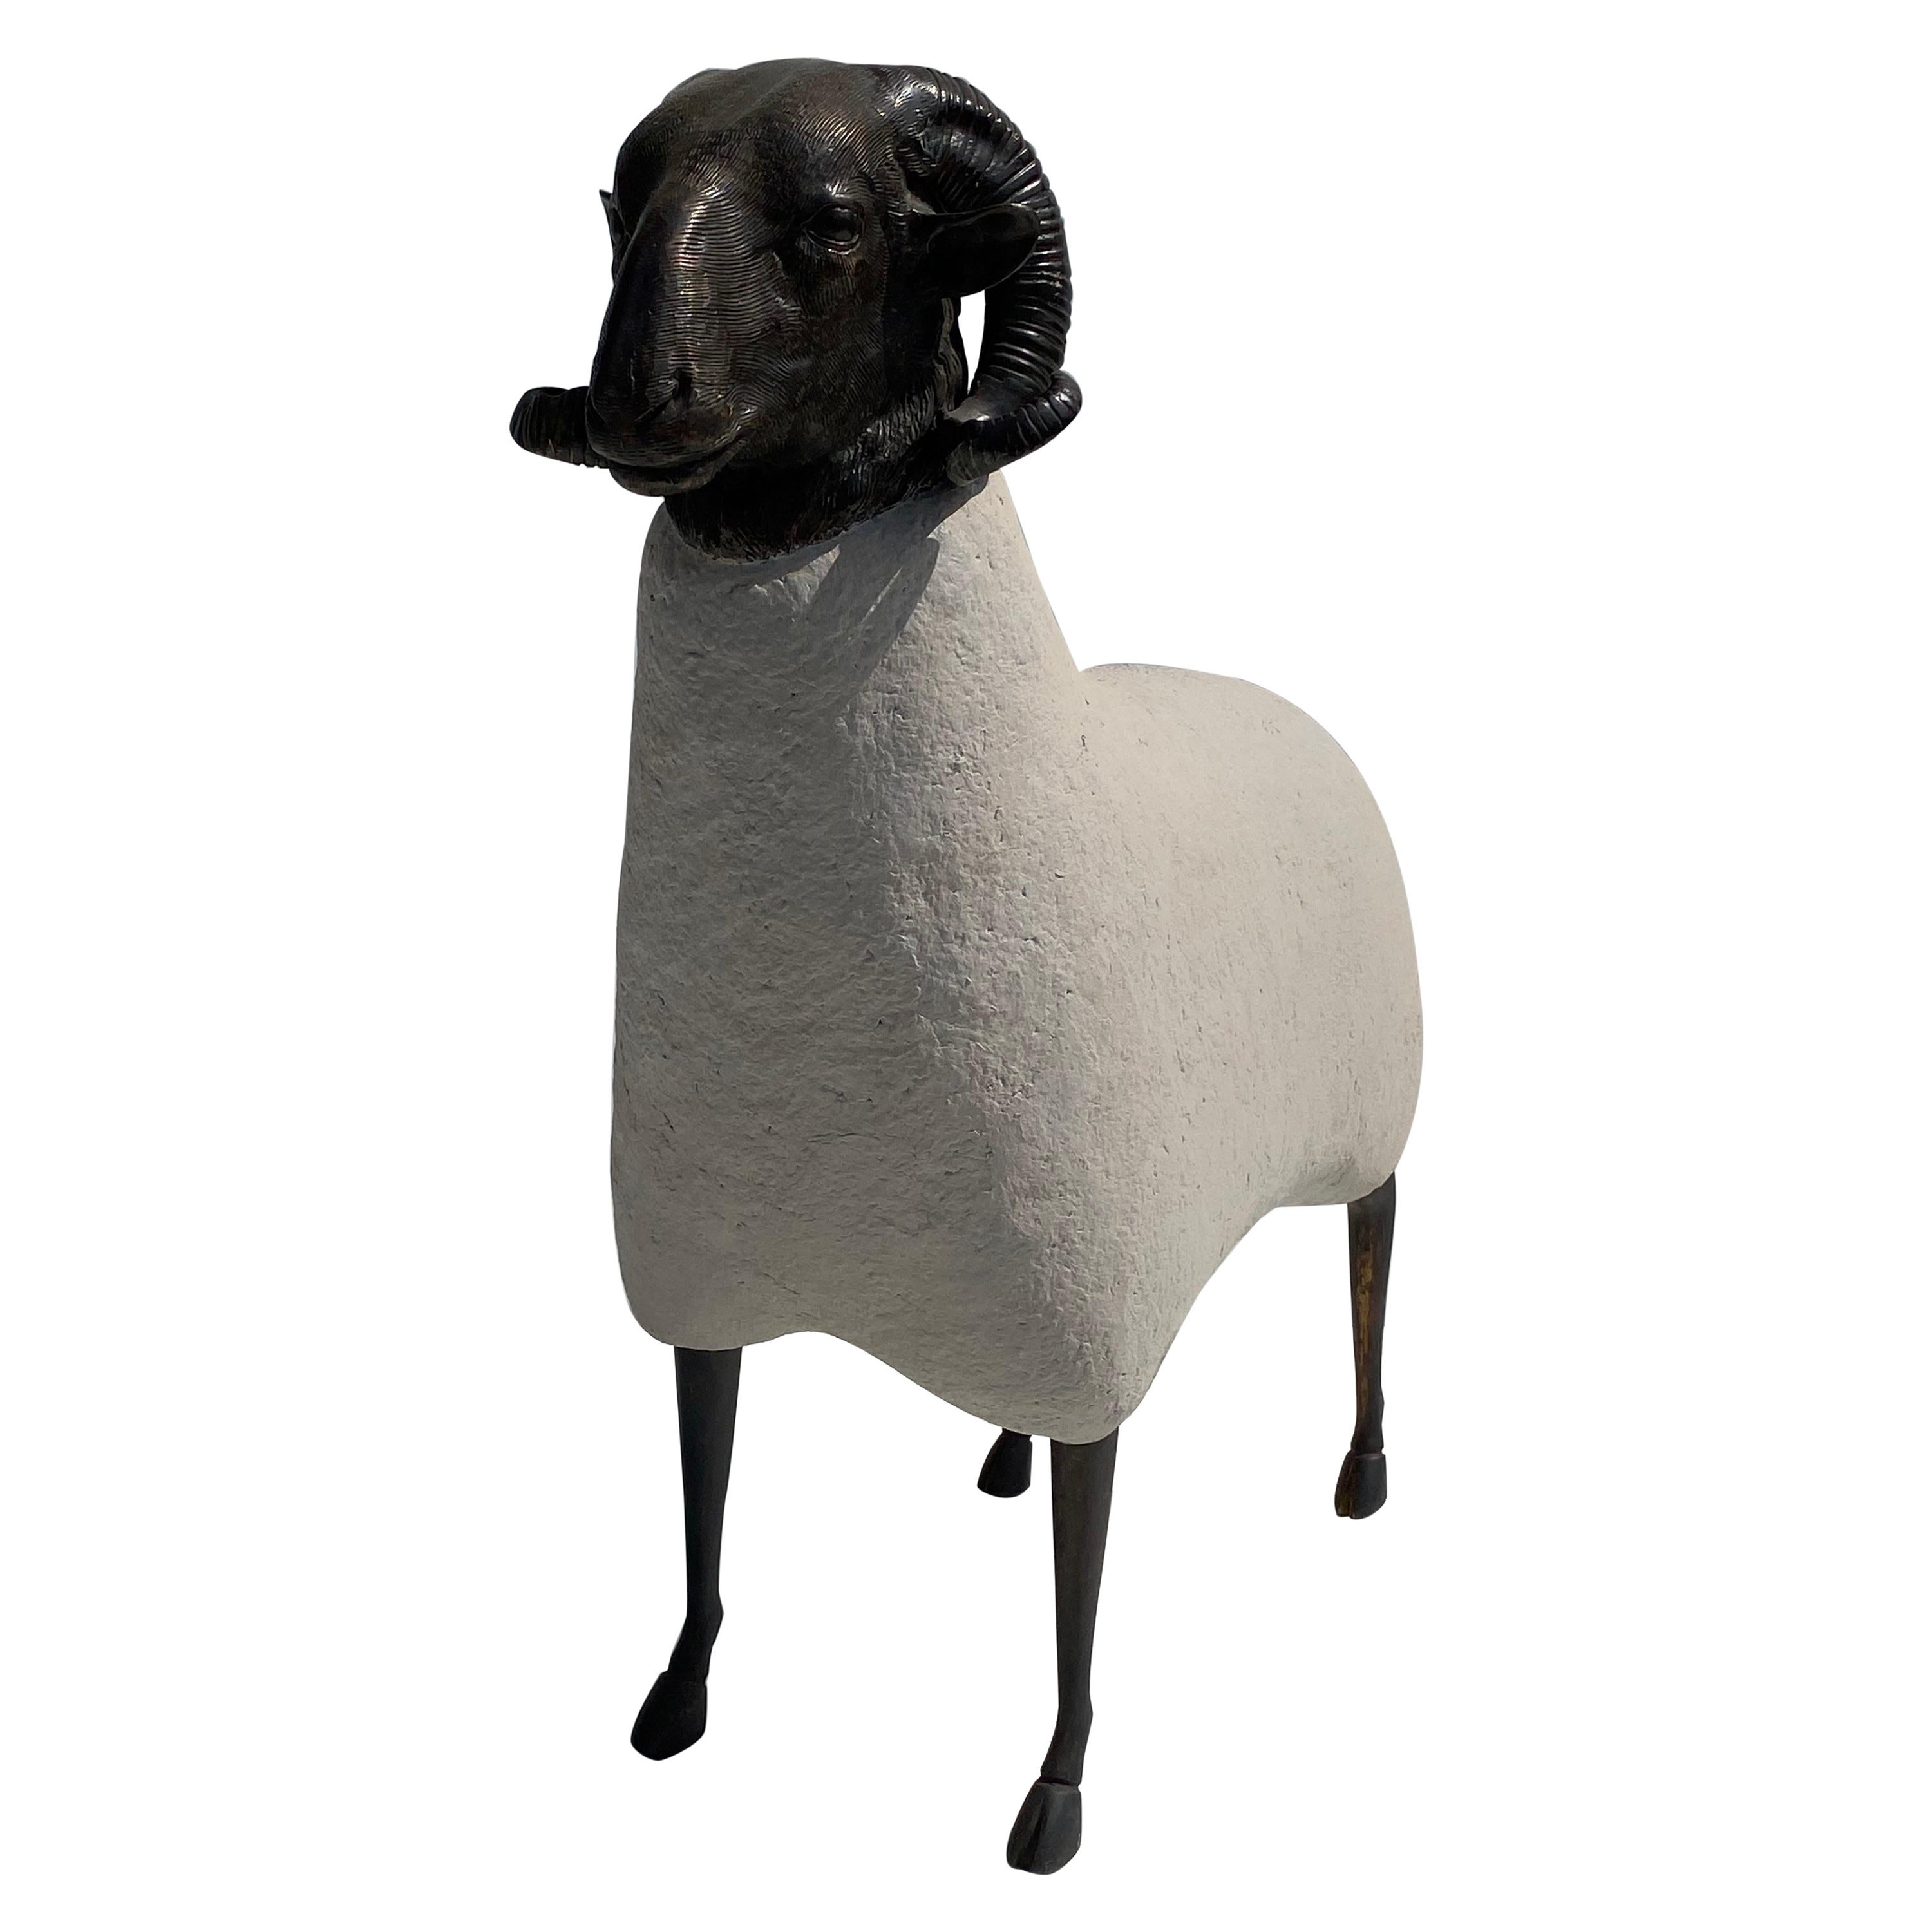 Patinated Brass Sheep / Ram Sculpture in Faux Concrete